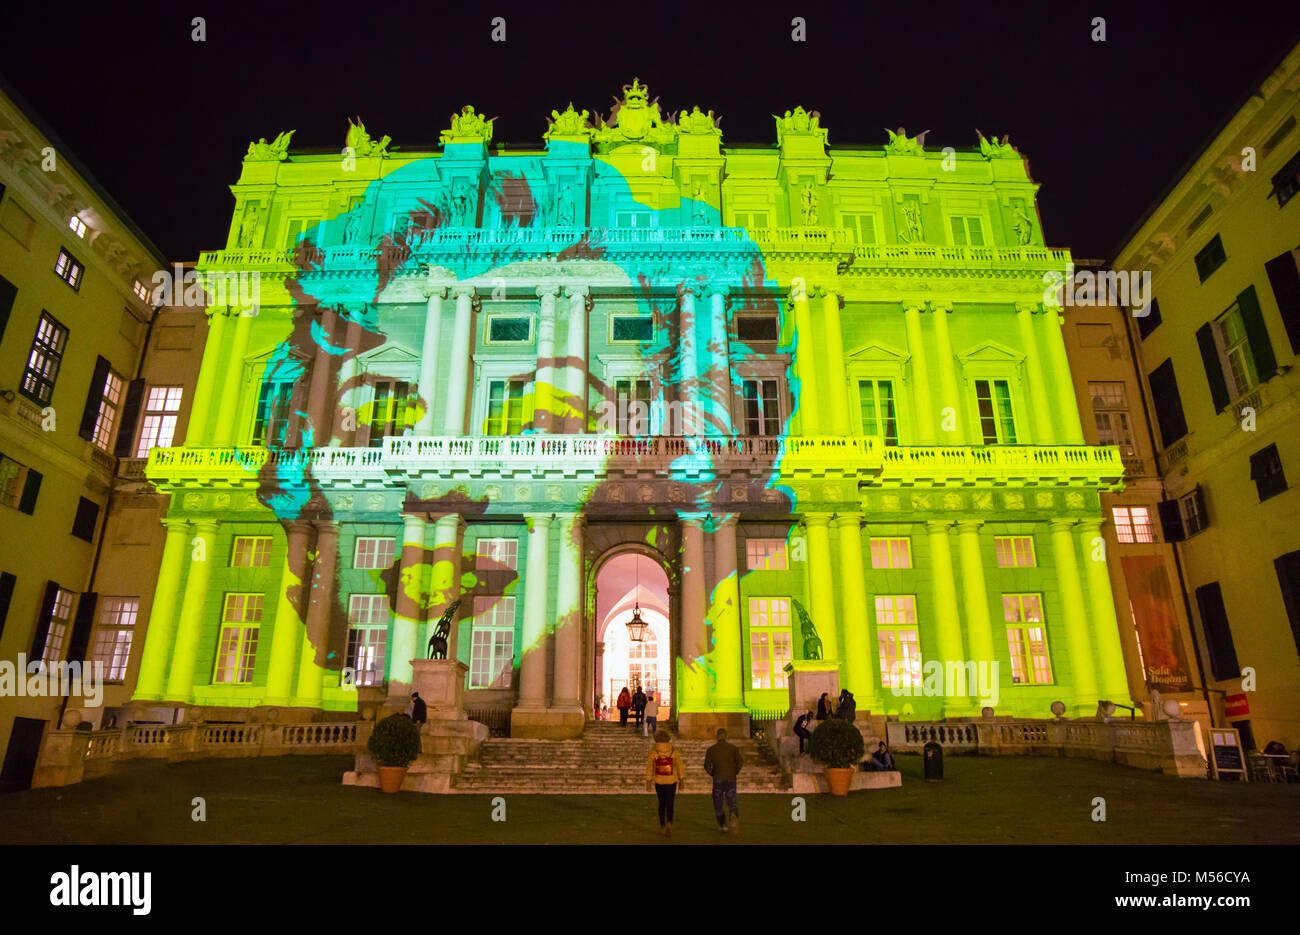 GENOA (GENOVA), ITALY, DECEMBER 28, 2016 - Palazzo Ducale, show dedicated to Andy Warhol event exposure. The projection represents the face of Marilyn Stock Photo